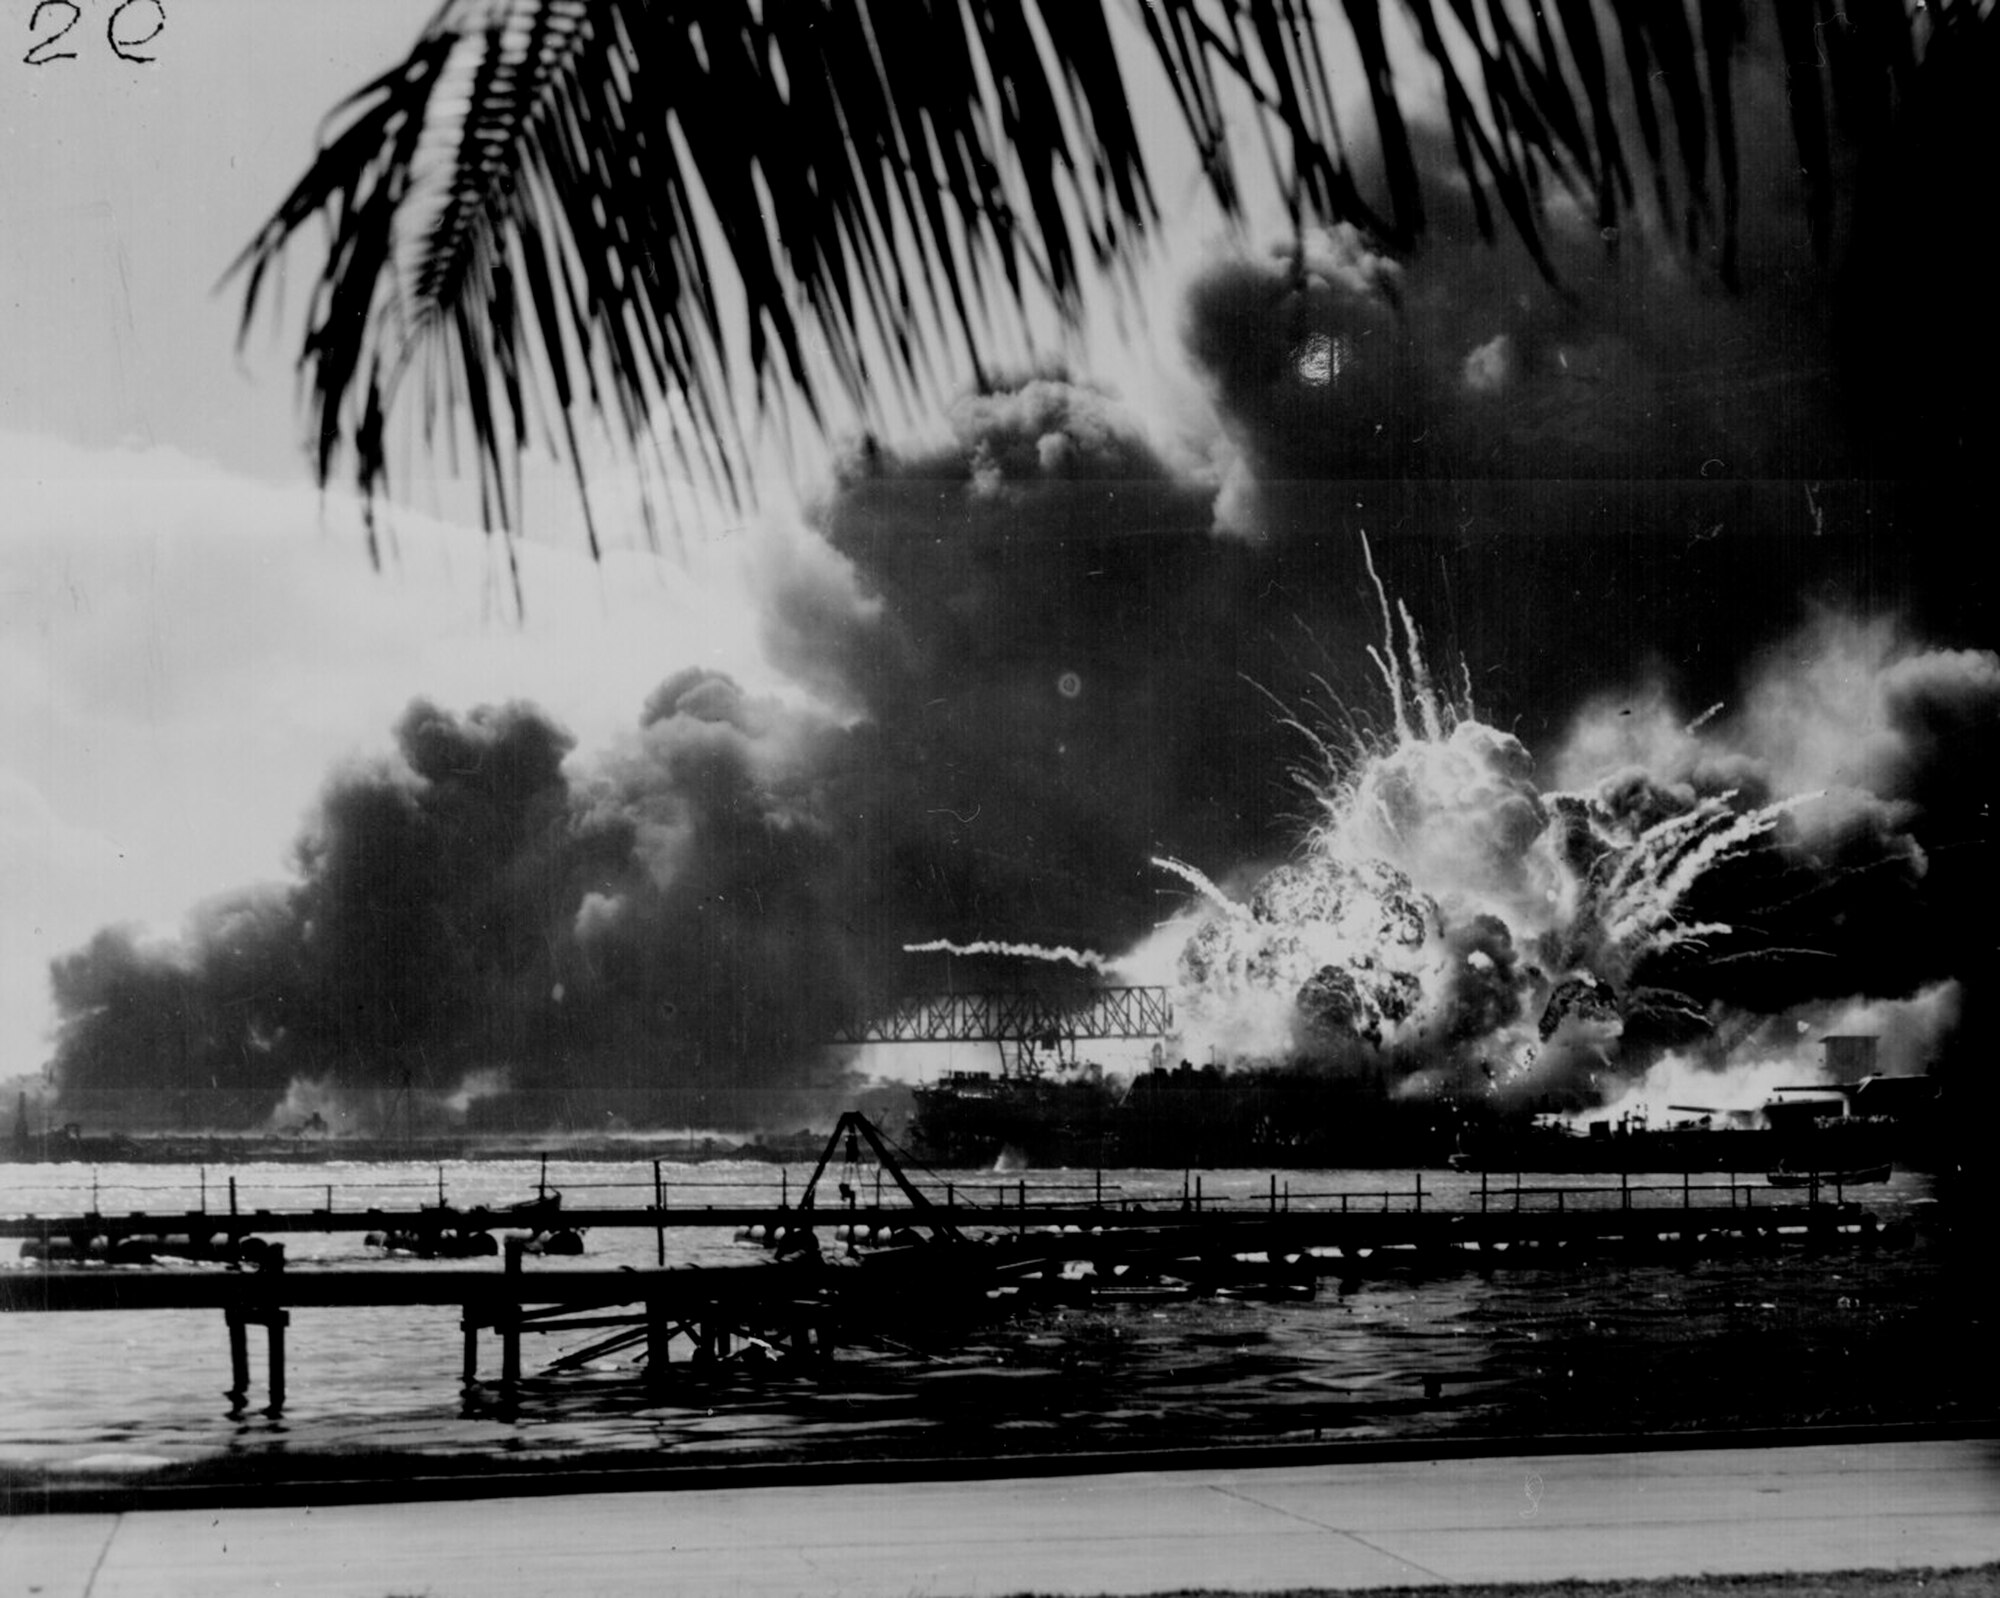 The forward magazine of USS Shaw (DD-373) explodes during the second Japanese attack wave. To the left of the explosion, Shaw's stern is visible, at the end of floating drydock YFD-2.  At right is the bow of USS Nevada (BB-36), with a tug alongside fighting fires. (Courtesy Photo/Naval History and Heritage Command)